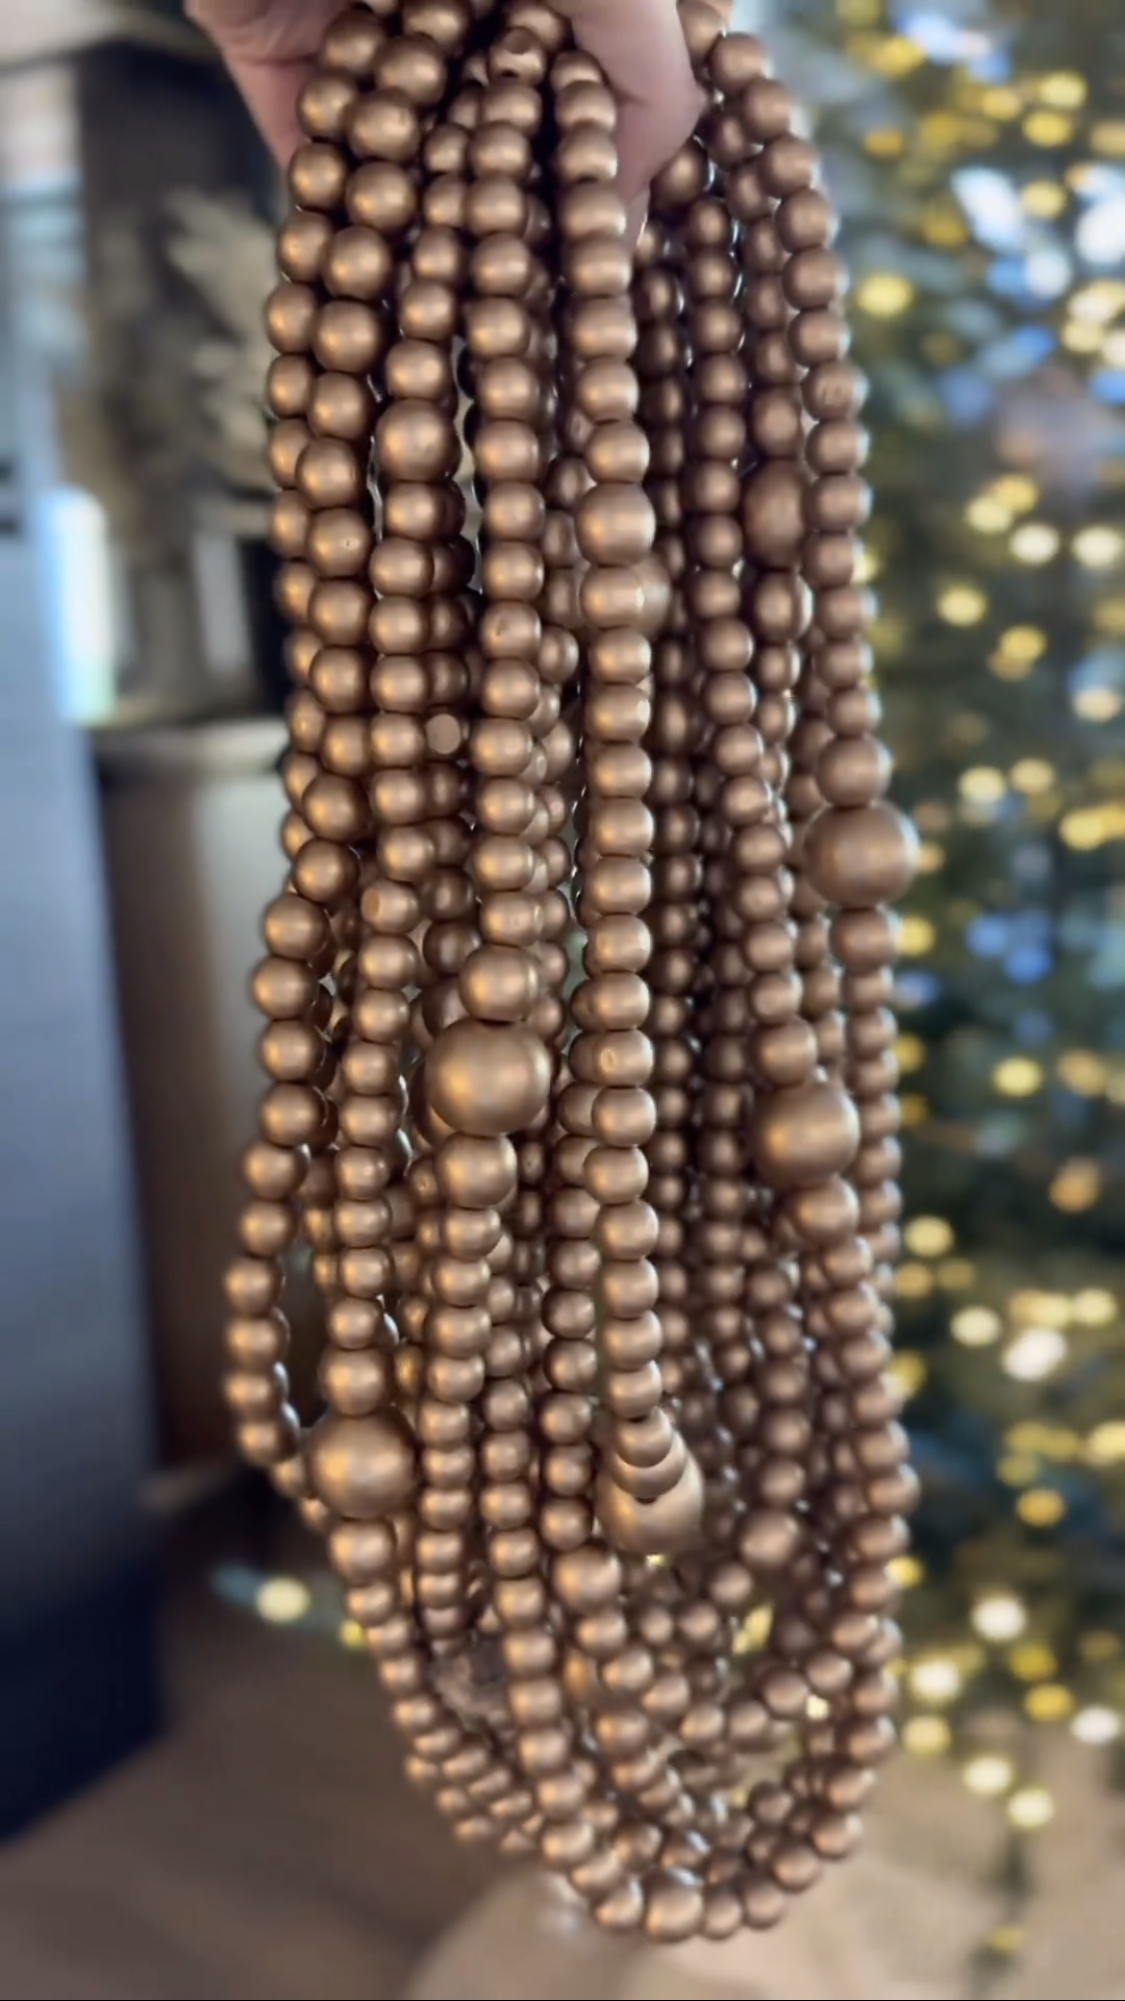 new holiday must haves | #new #holiday #musthaves #christmas #holidaydecor #seasonal #garland #wooden #bead #gold #beaded #christmastree #faux #snowy #bedroom